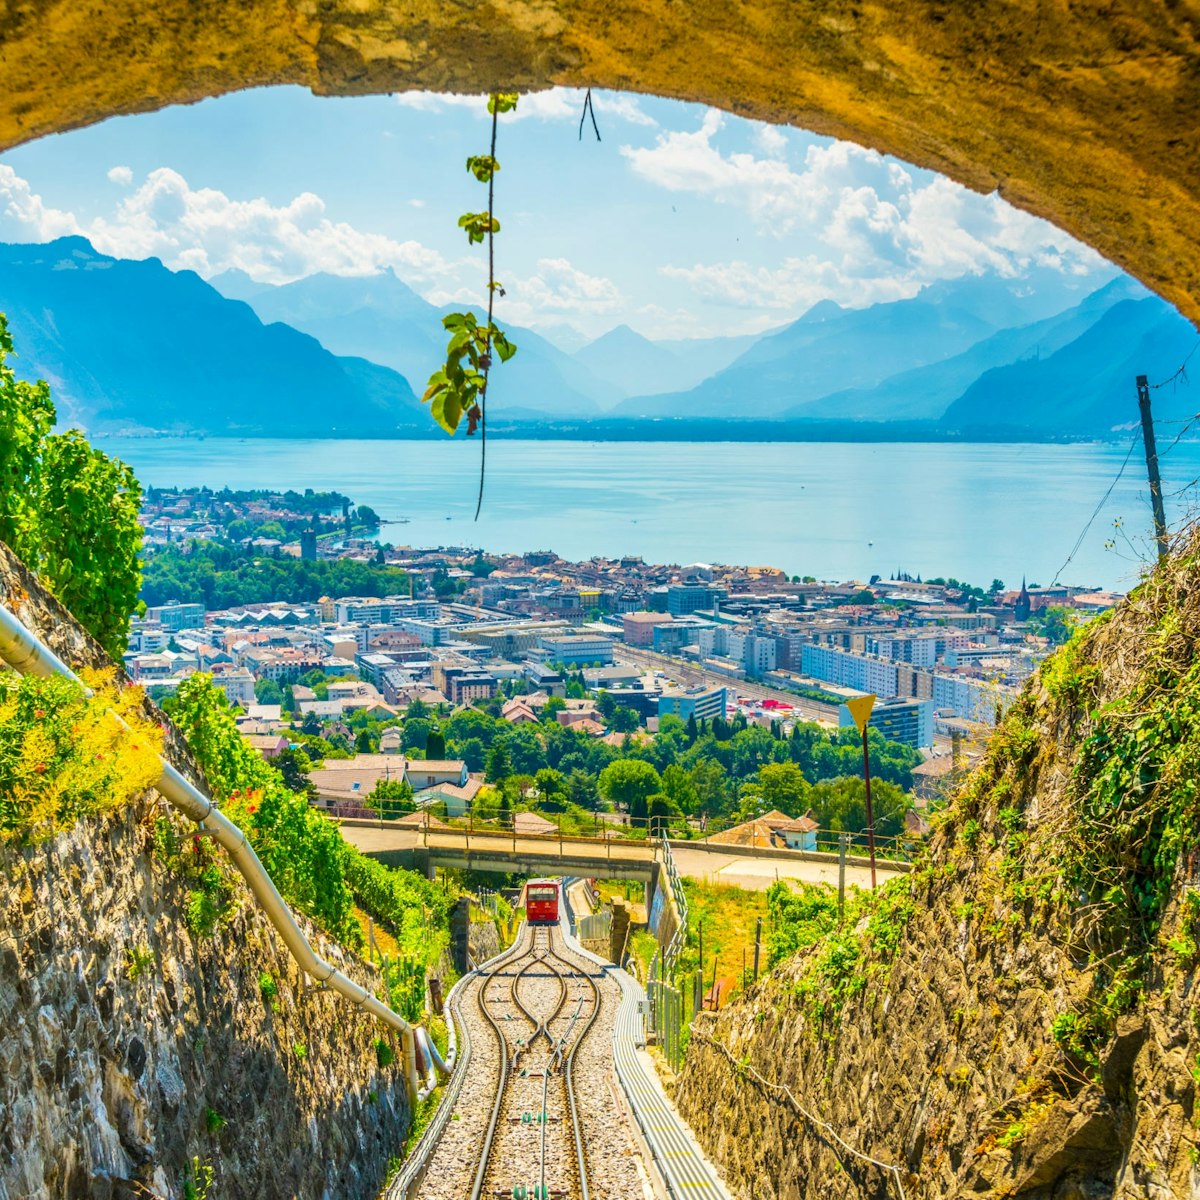 Vevey and lake Geneva, as seen from the funicular ascending to Mont Pelerin.
